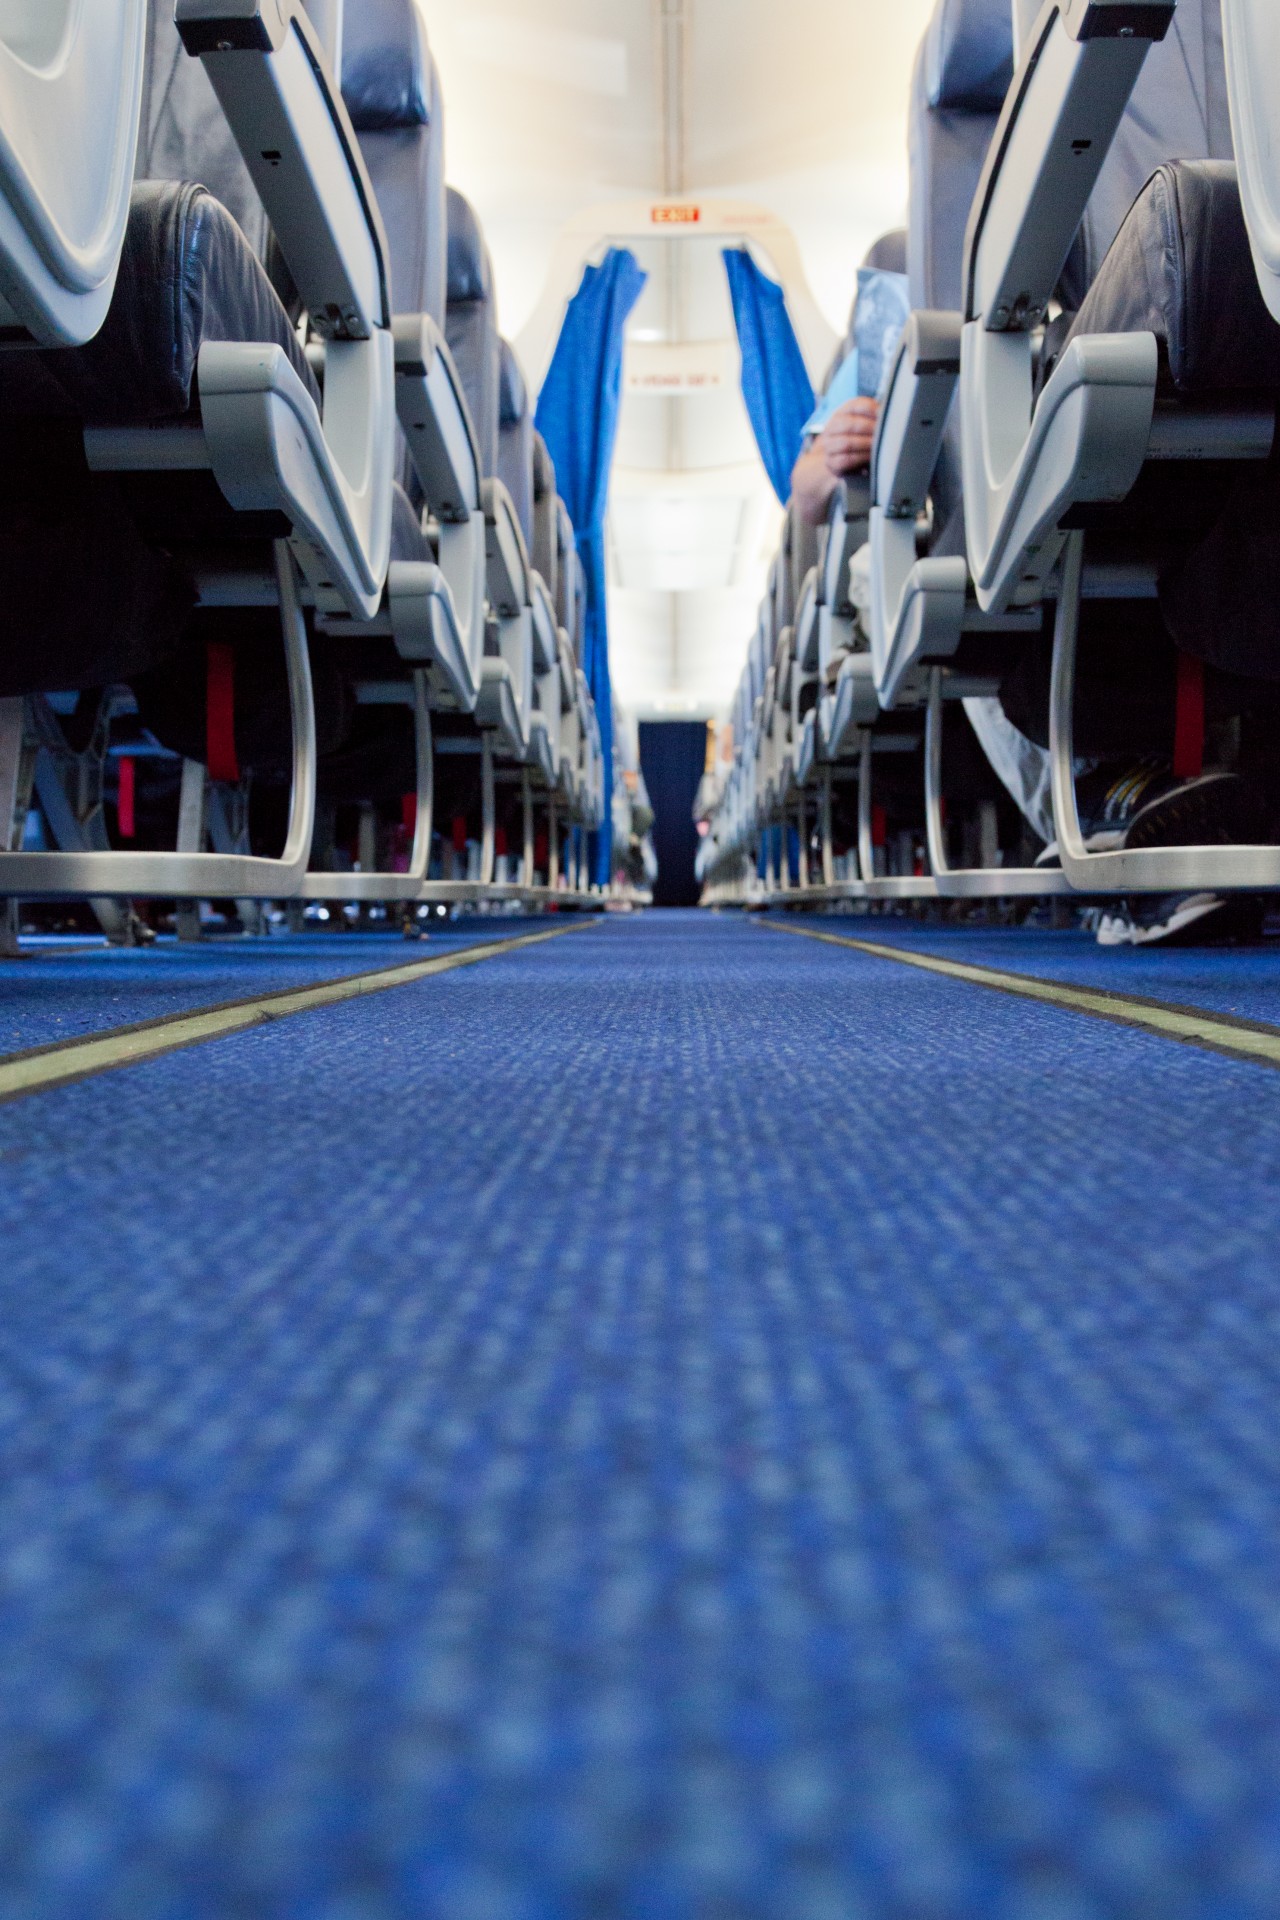 aisle-in-a-plane-free-stock-photo-public-domain-pictures